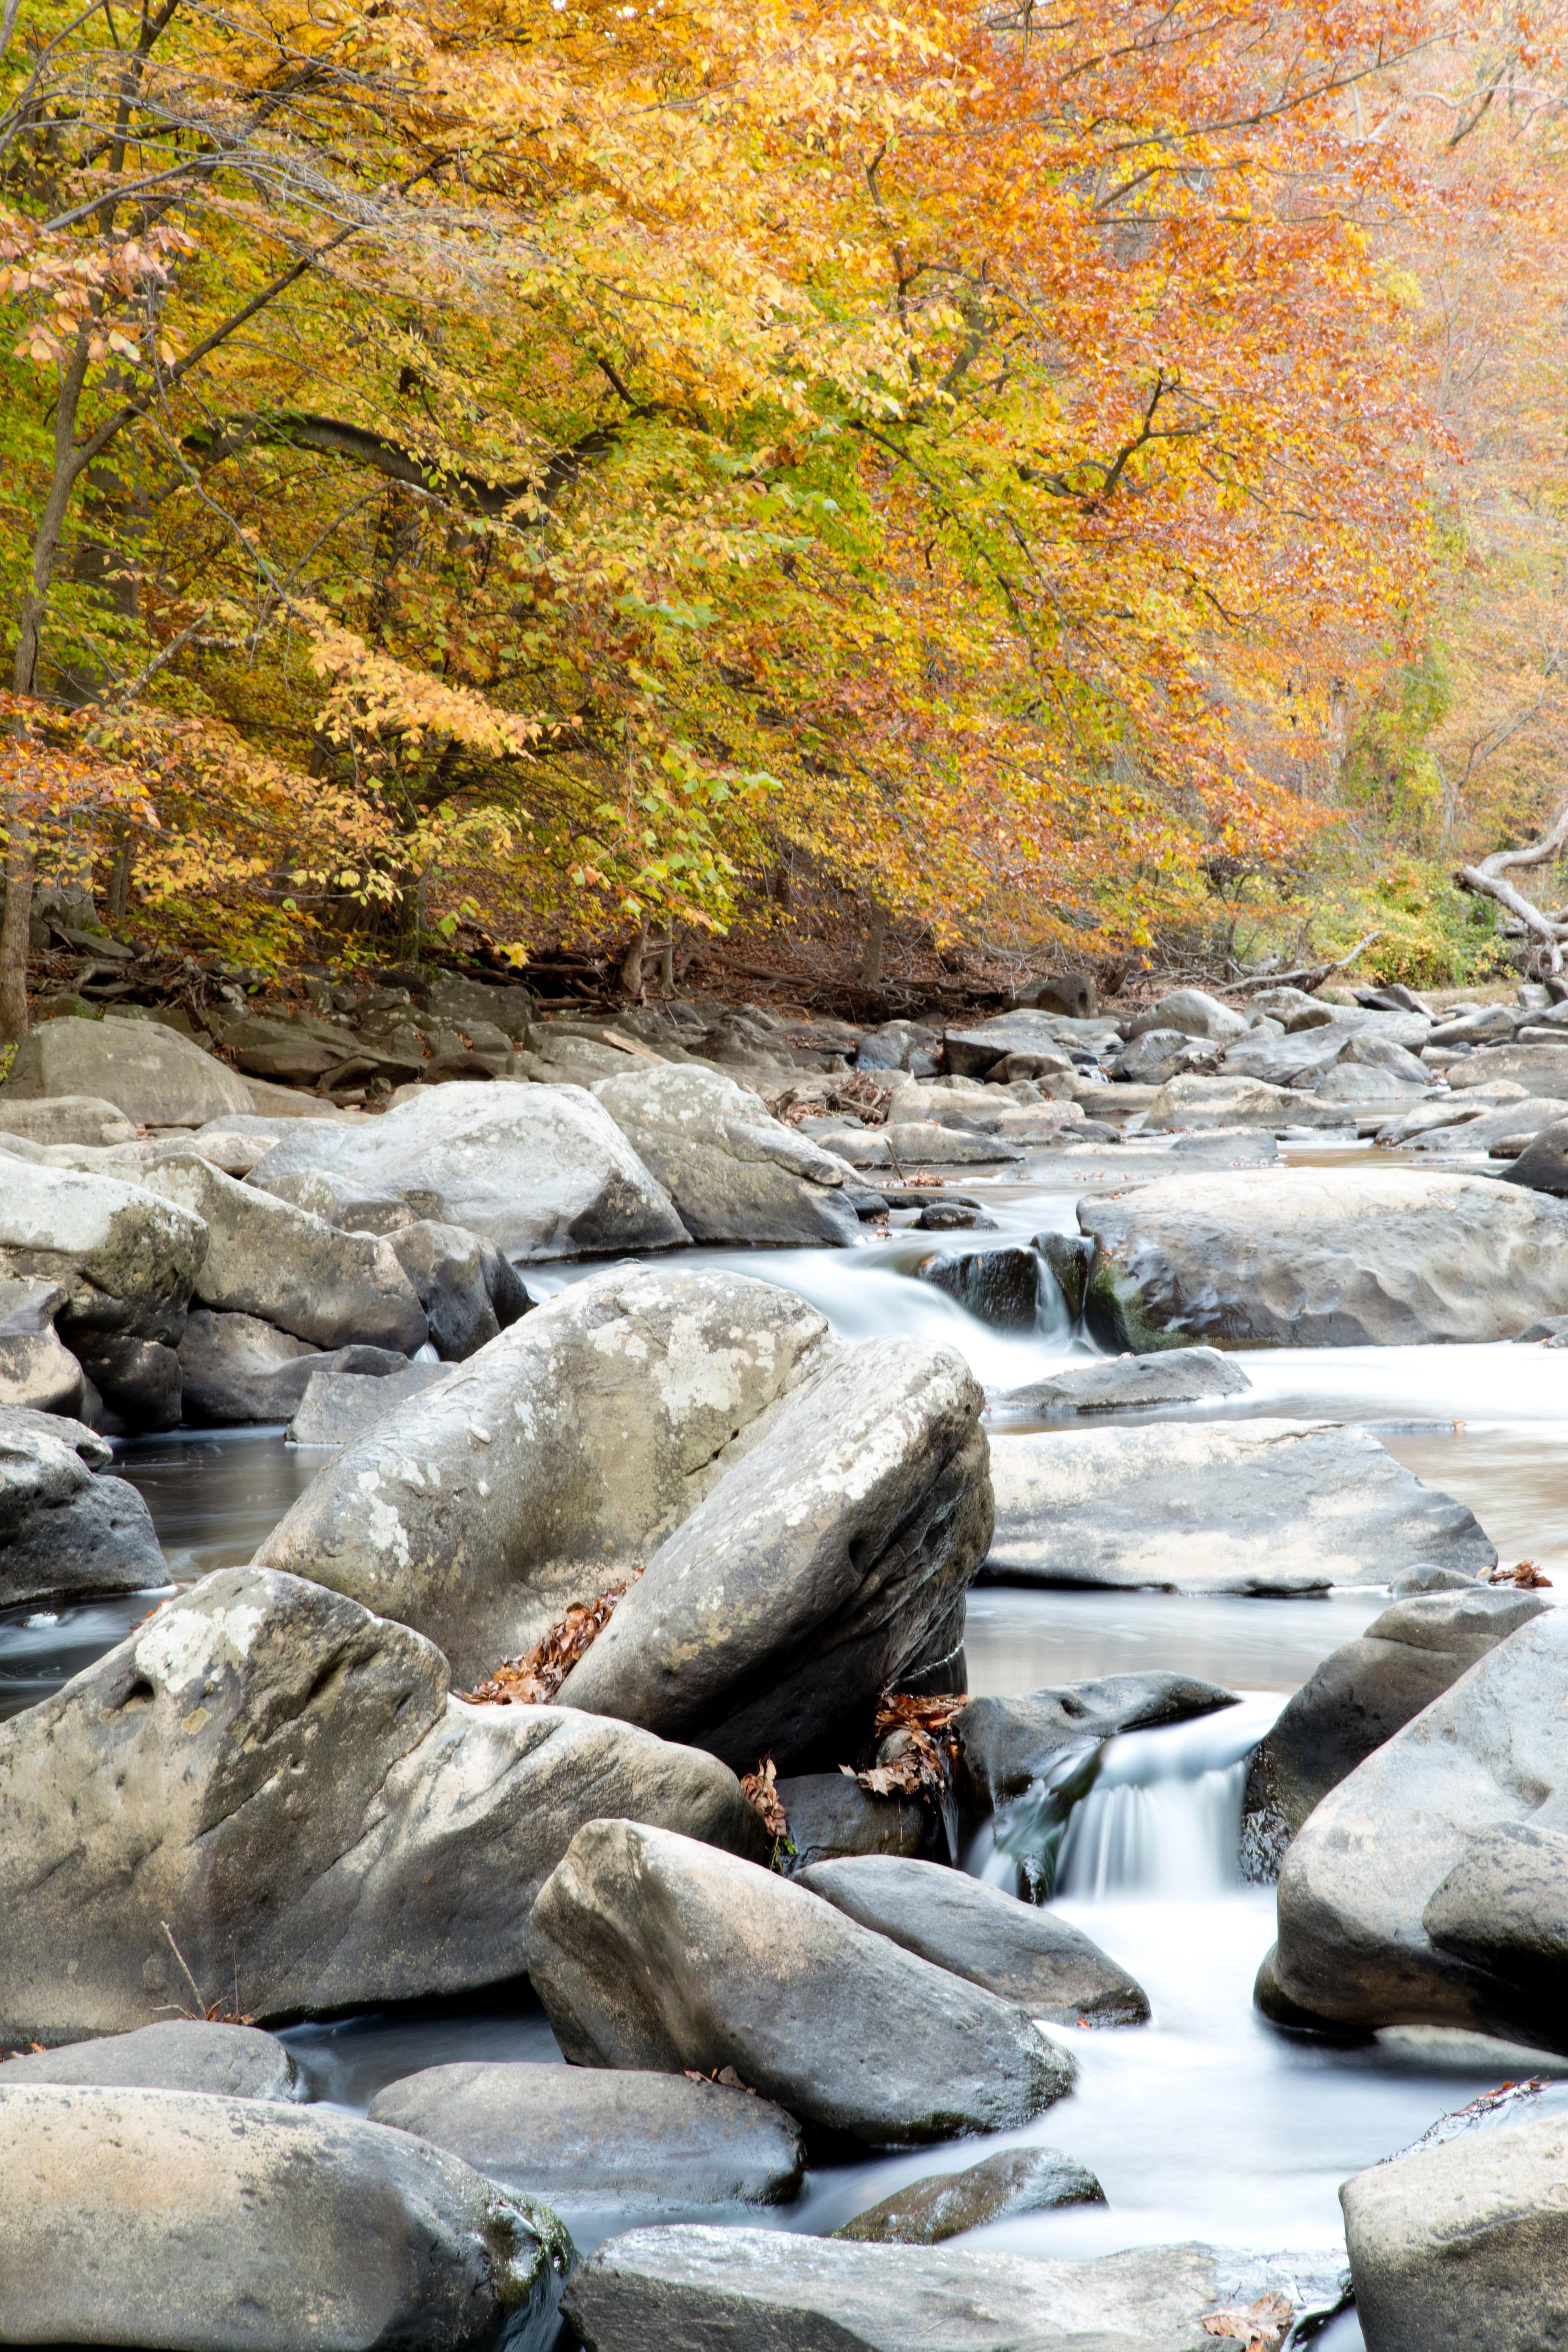 Water swirls around large boulders in a creek.  Trees in autumn colors line the bank